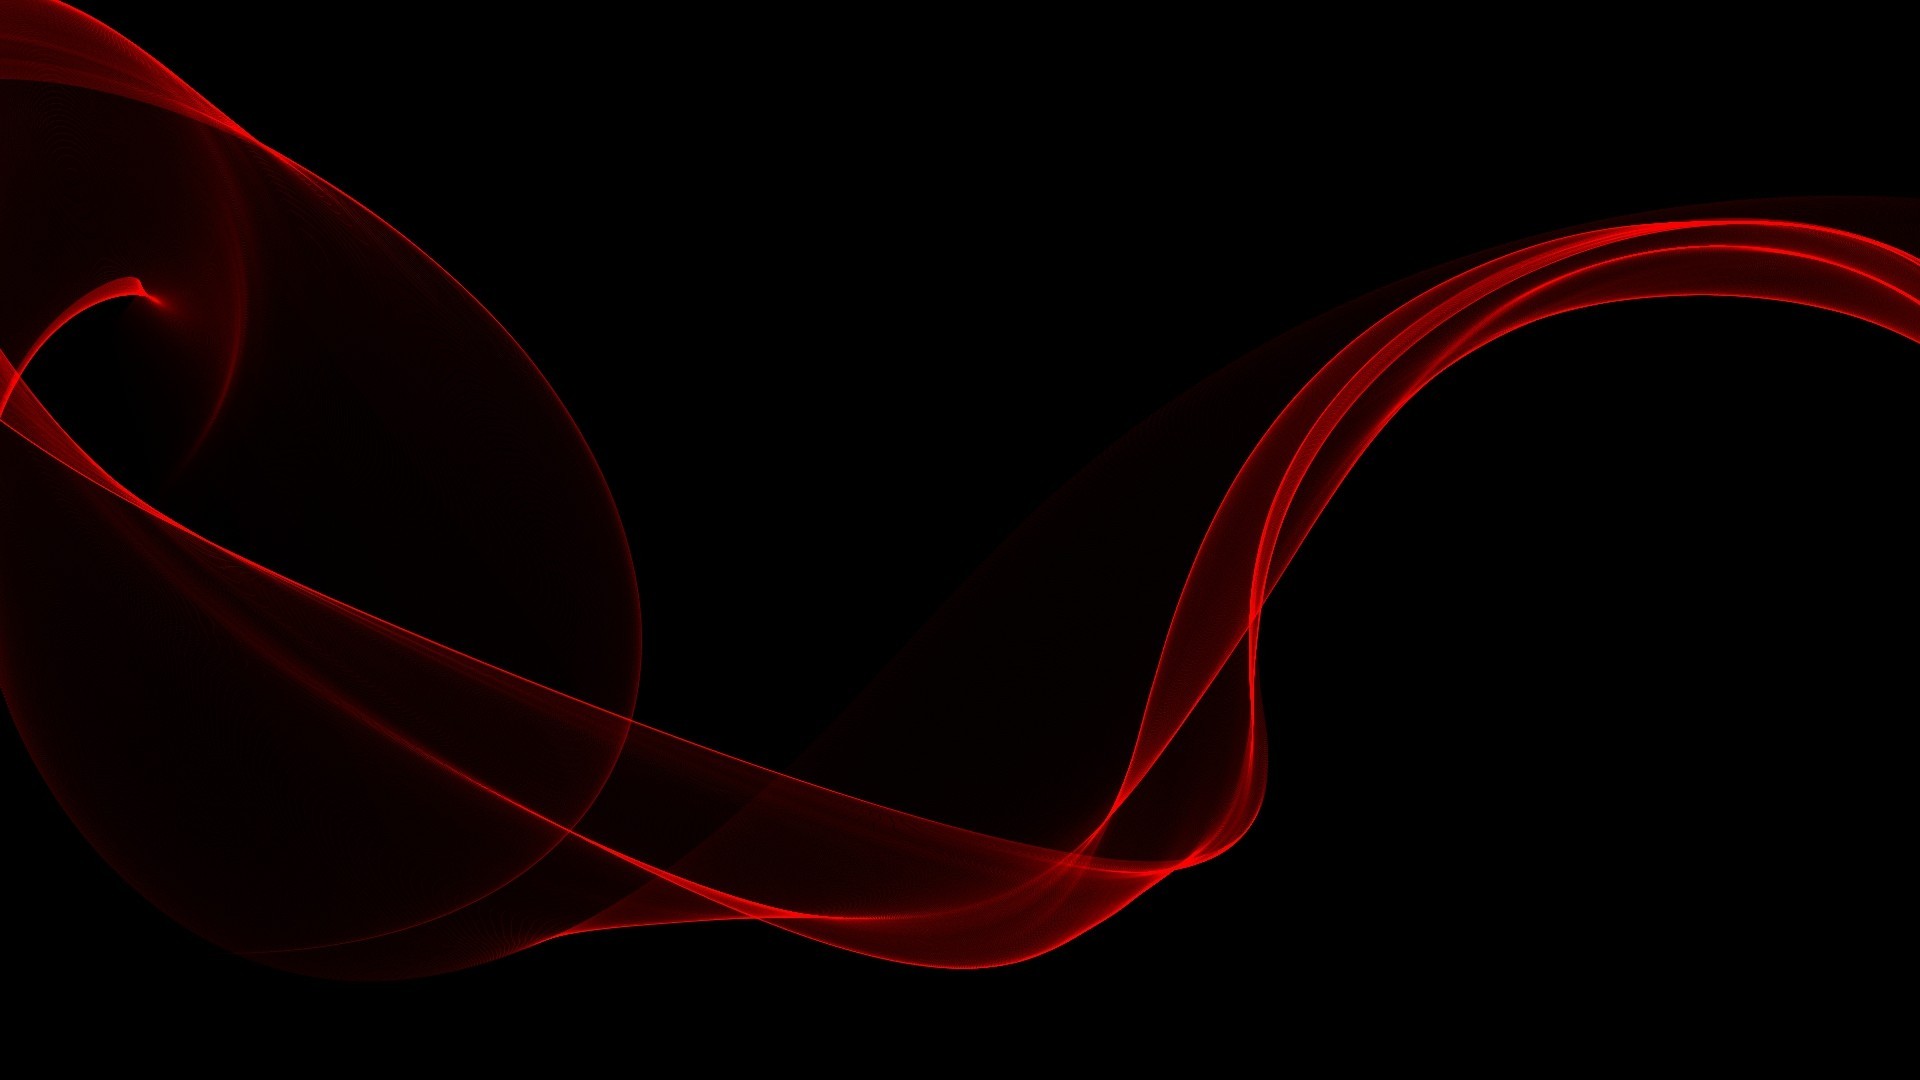 Black and Red Background Wallpaper HD with high-resolution 1920x1080 pixel. You can use this wallpaper for your Desktop Computer Backgrounds, Mac Wallpapers, Android Lock screen or iPhone Screensavers and another smartphone device